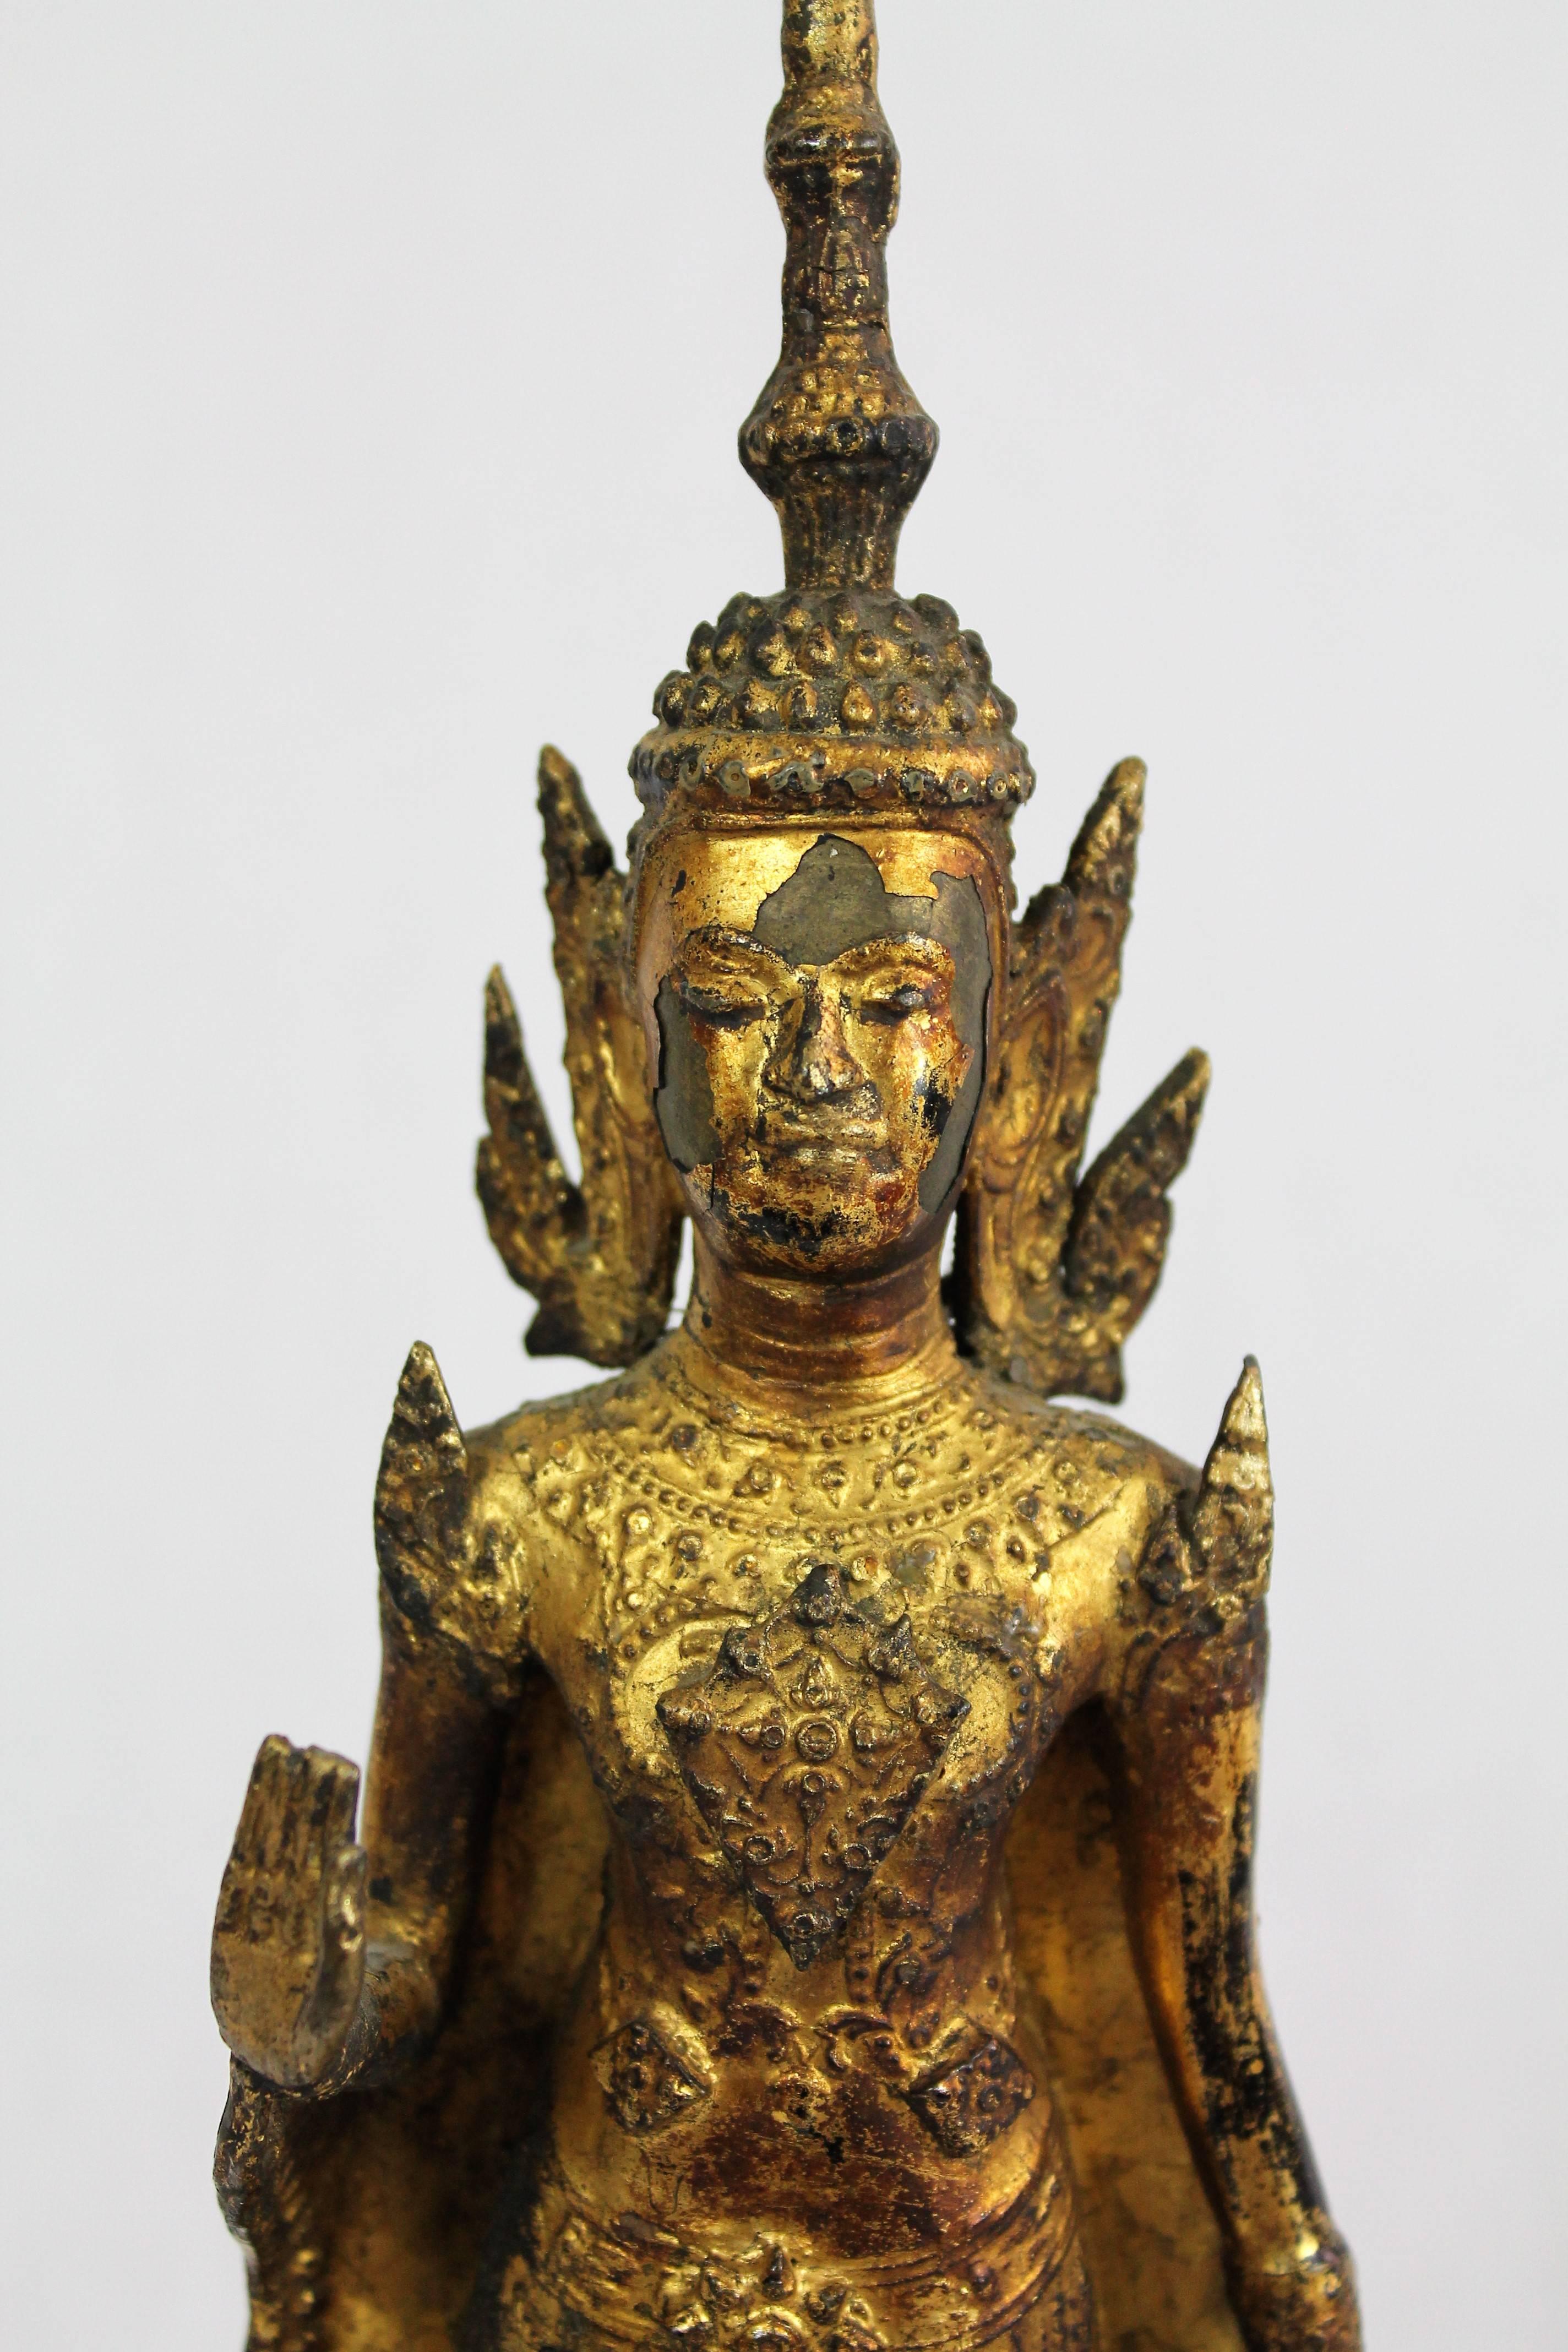 Paang Harm Samoot Buddha (Monday Buddha). Guilt-lacquered bronze statuette of adorned Buddha standing on a lotus flower.
Thailand, Rattanakosin period 19th century
Provenance: French private collection.